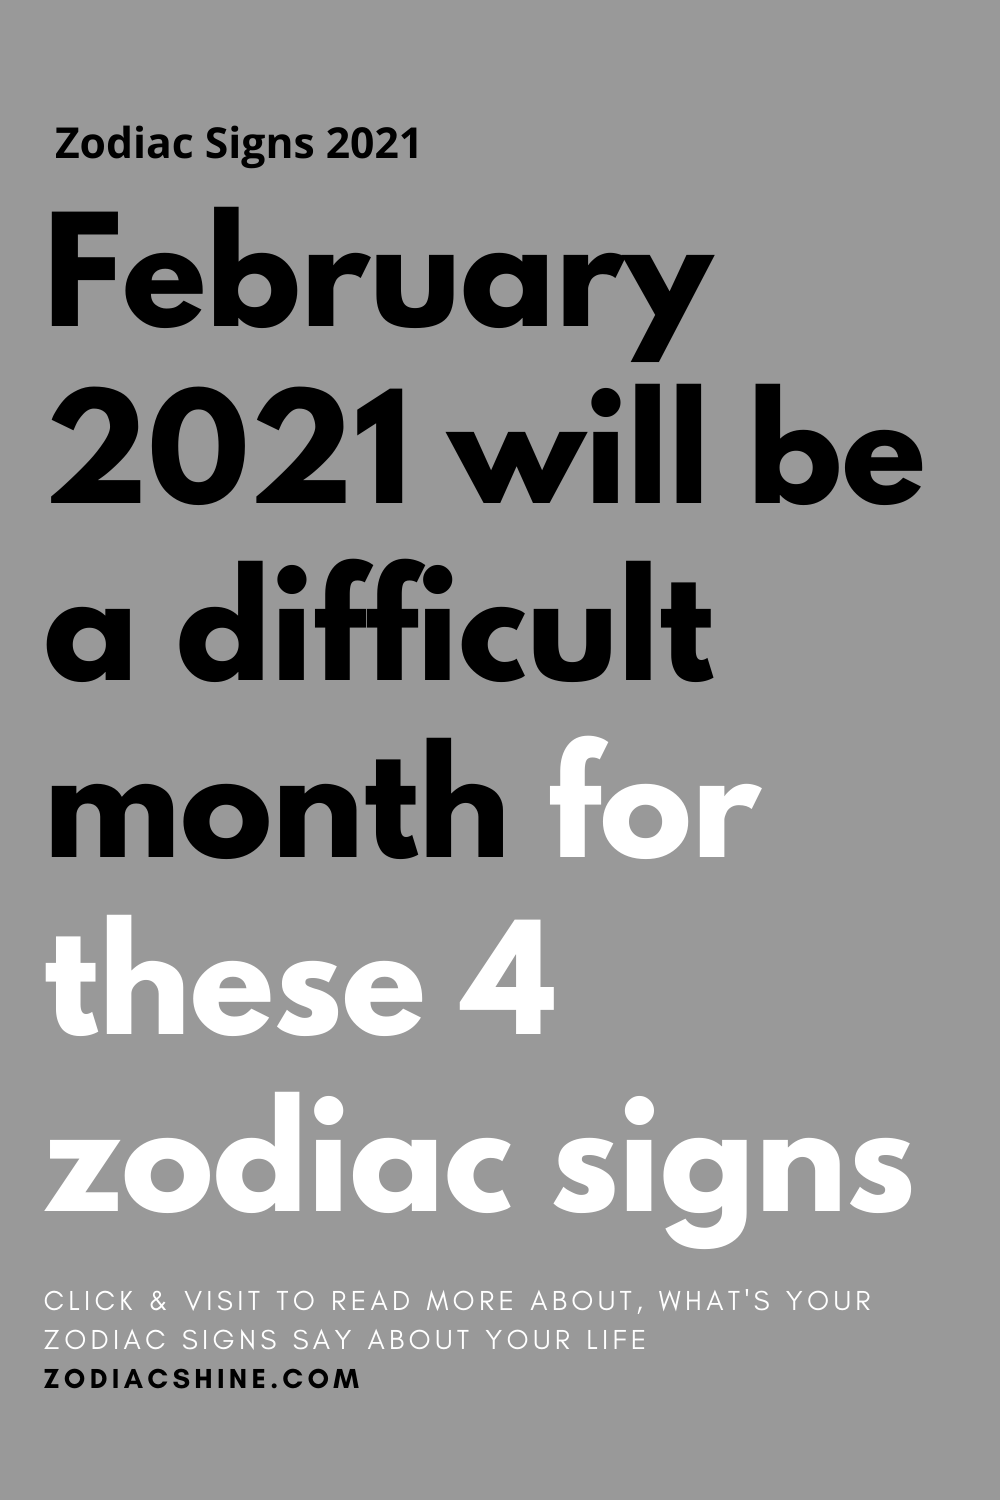 February 2021 will be a difficult month for these 4 zodiac signs